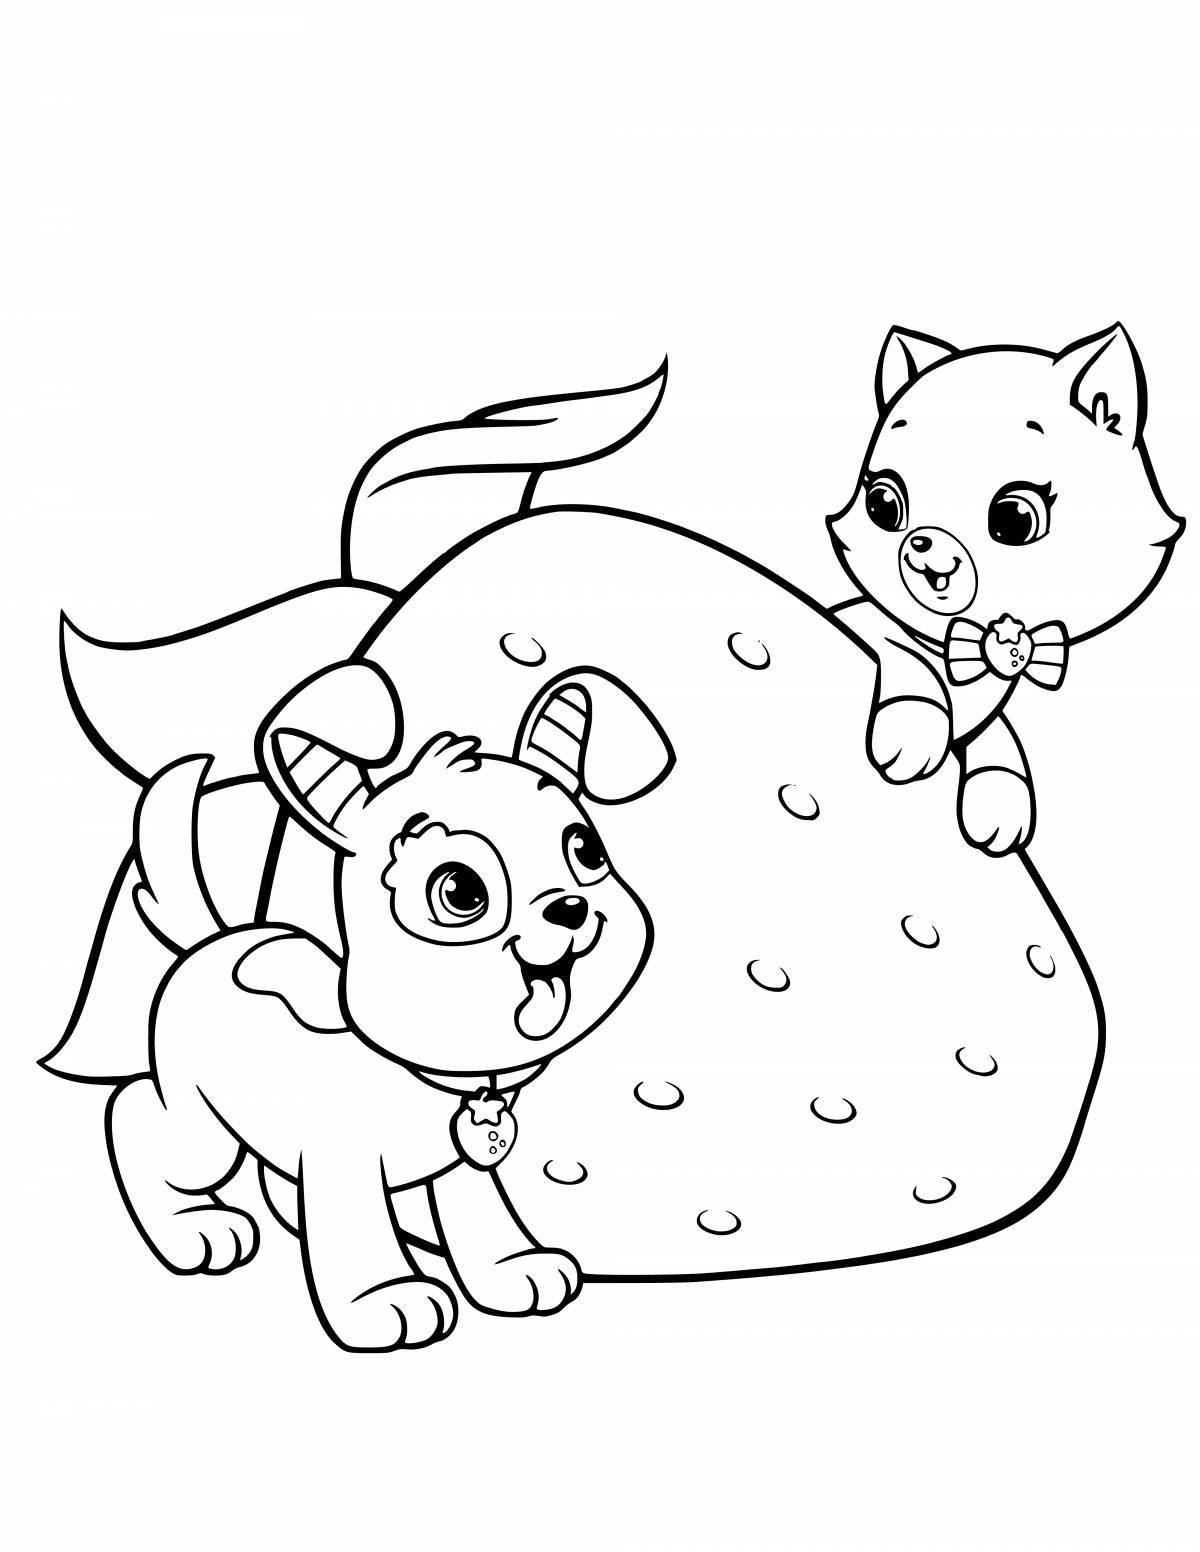 Precious cute cats and dogs coloring book